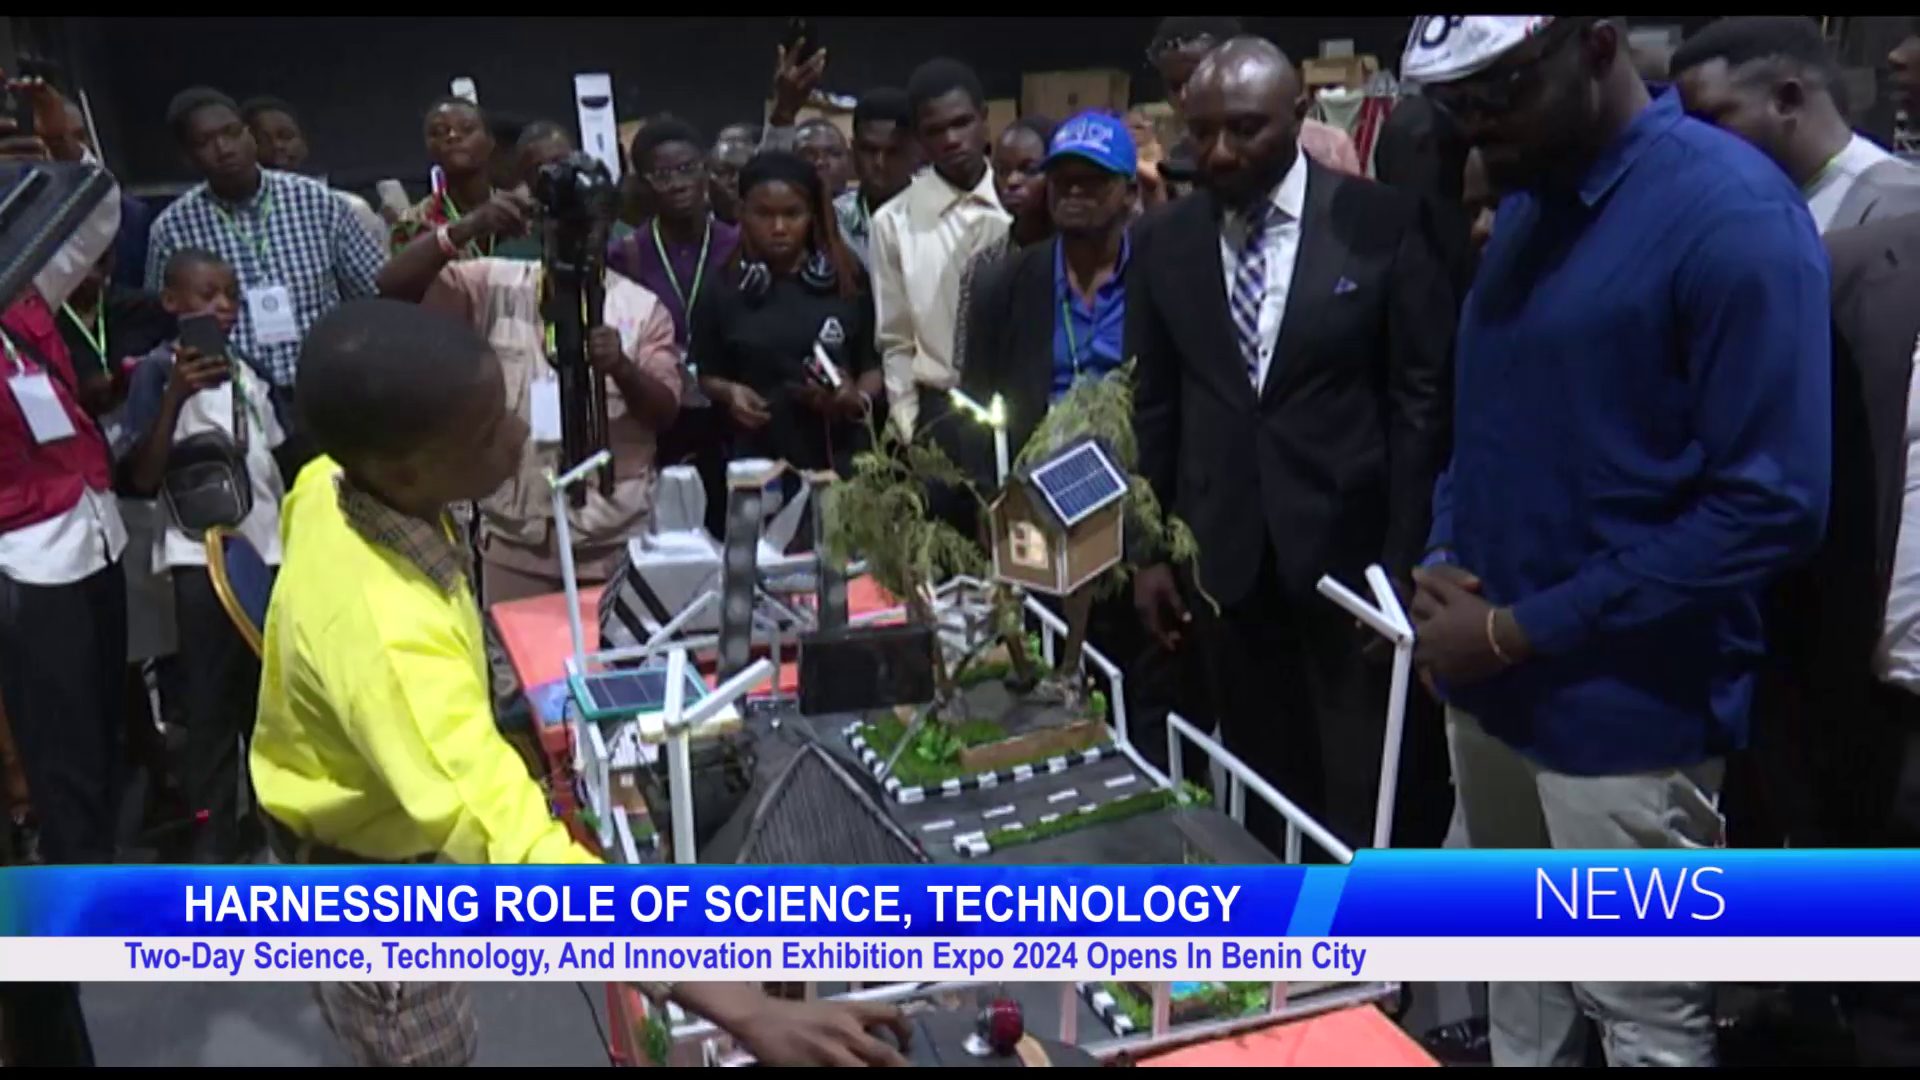 Two-Day Science, Technology, And Innovation Exhibition Expo 2024 Opens In Benin City